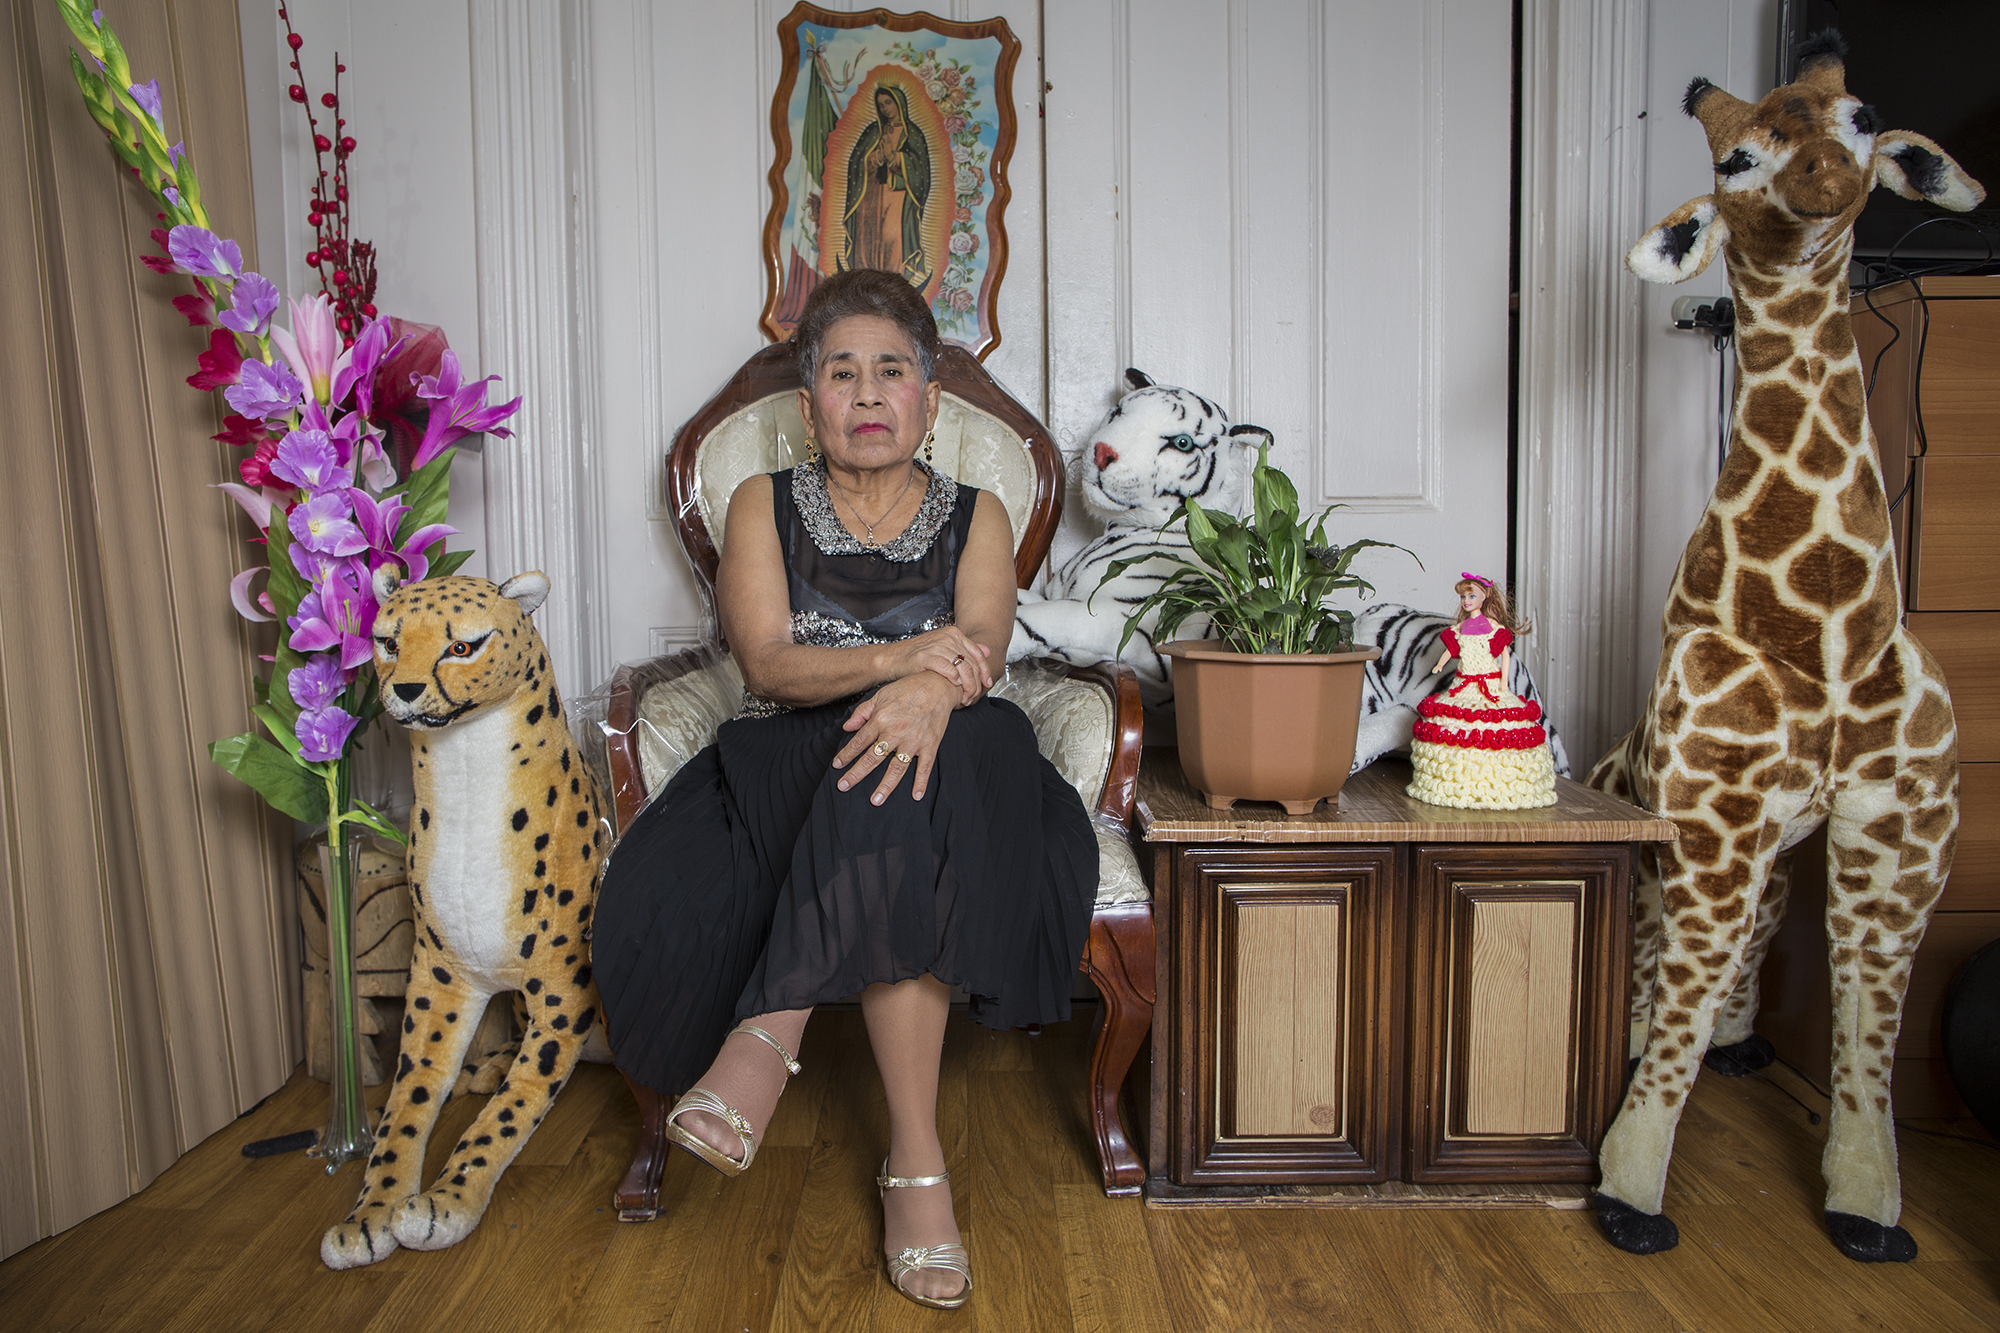  Gisela Bravo Martinez in her apartment at 45th Street in the neighborhood of Sunset Park, Brooklyn, New York. She is from San Bernardino, Acatlán de Osorio, State of Puebla, México. She has been living in New York City for more than two decades work